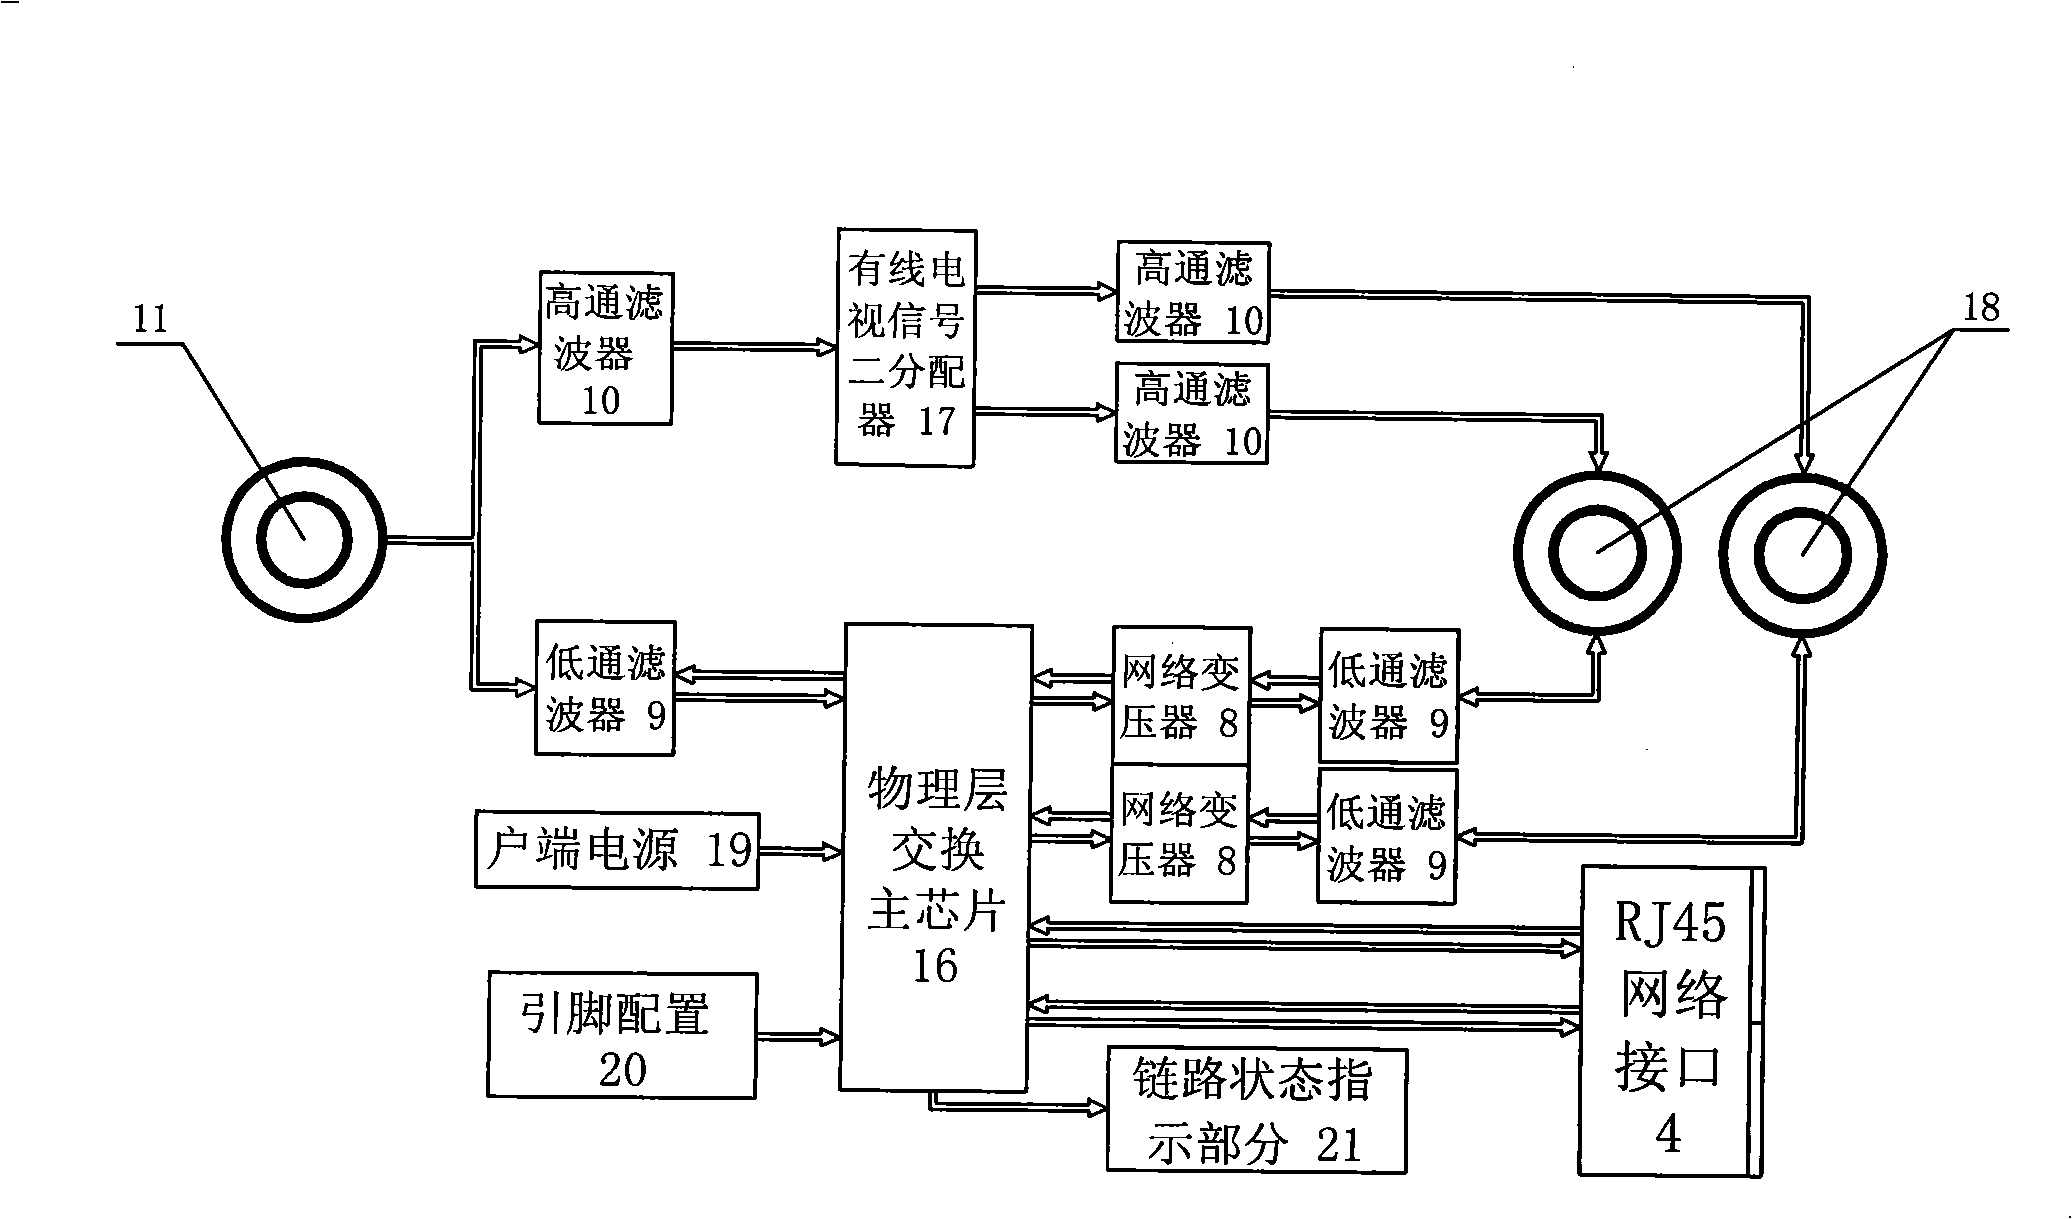 Ethernet switching system based on cable TV transmission network